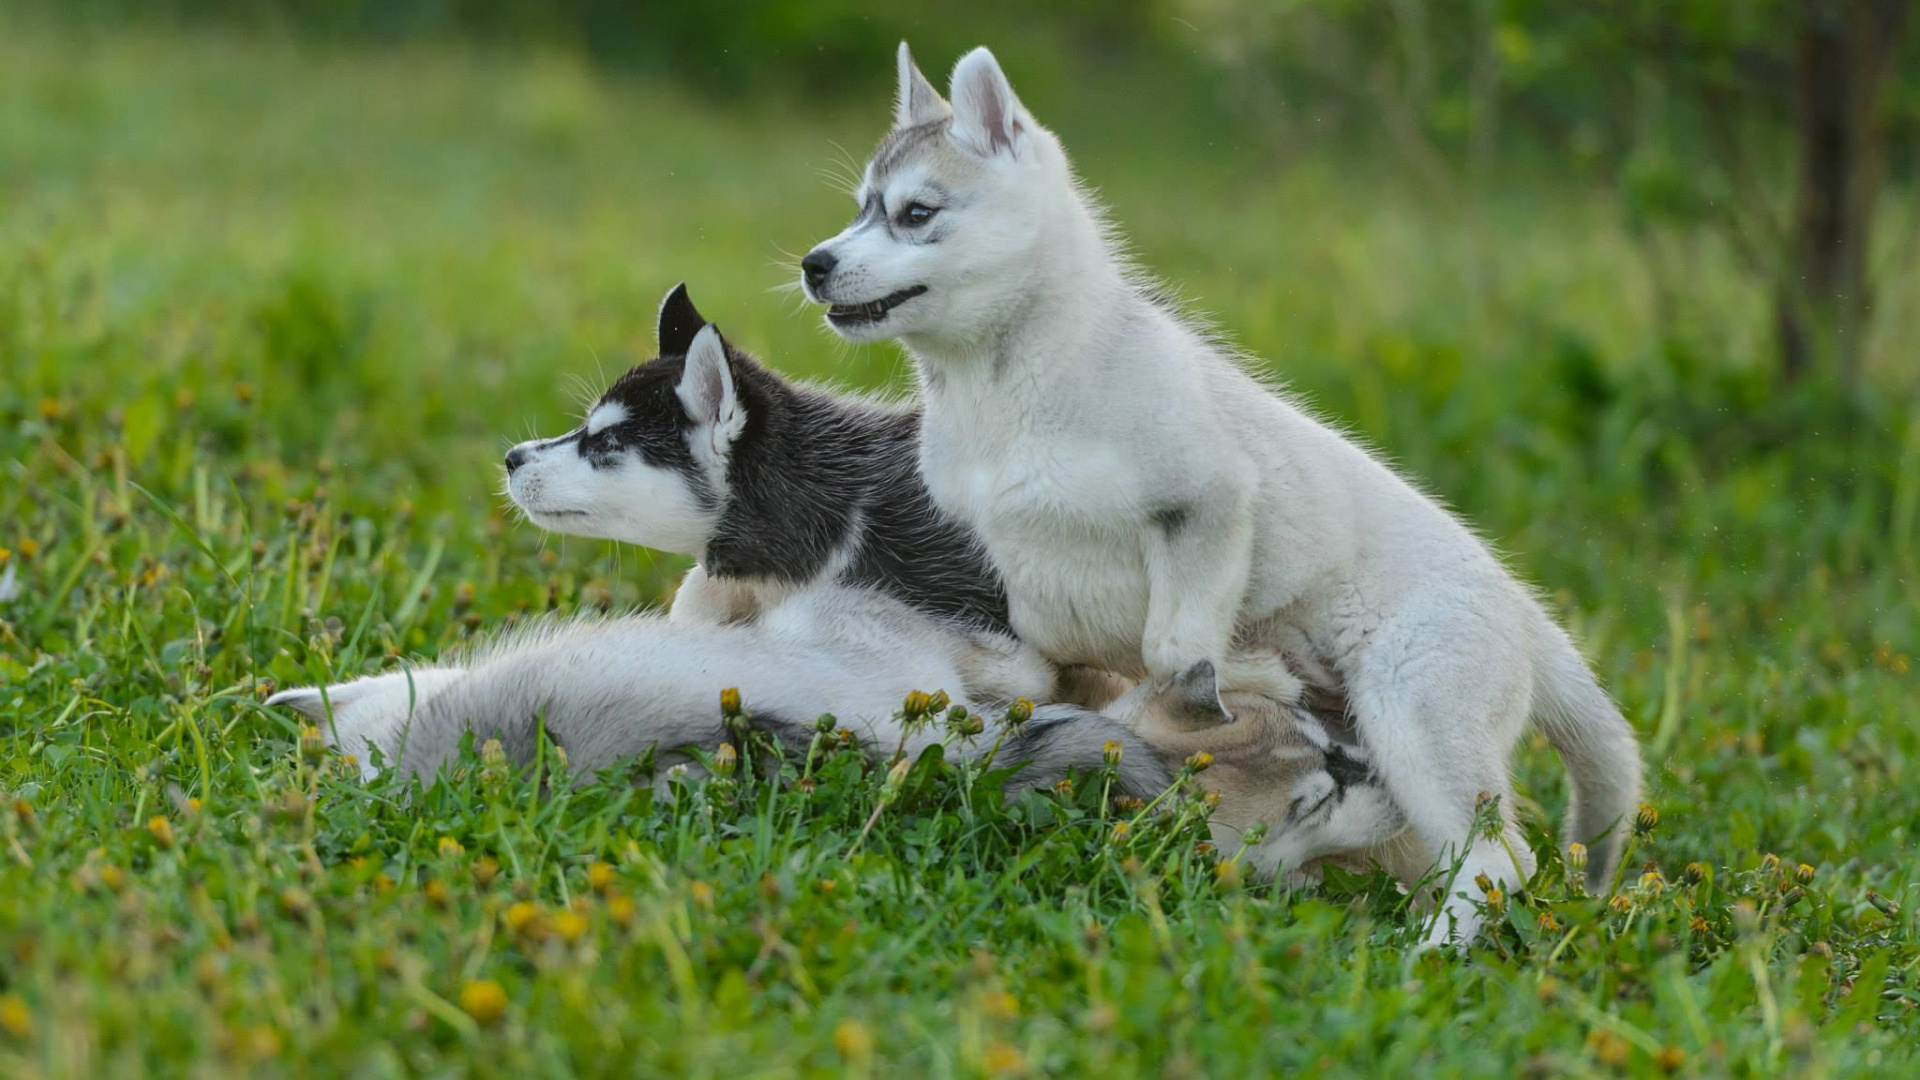 White and Black Siberian Husky Puppy on Green Grass Field During Daytime. Wallpaper in 1920x1080 Resolution